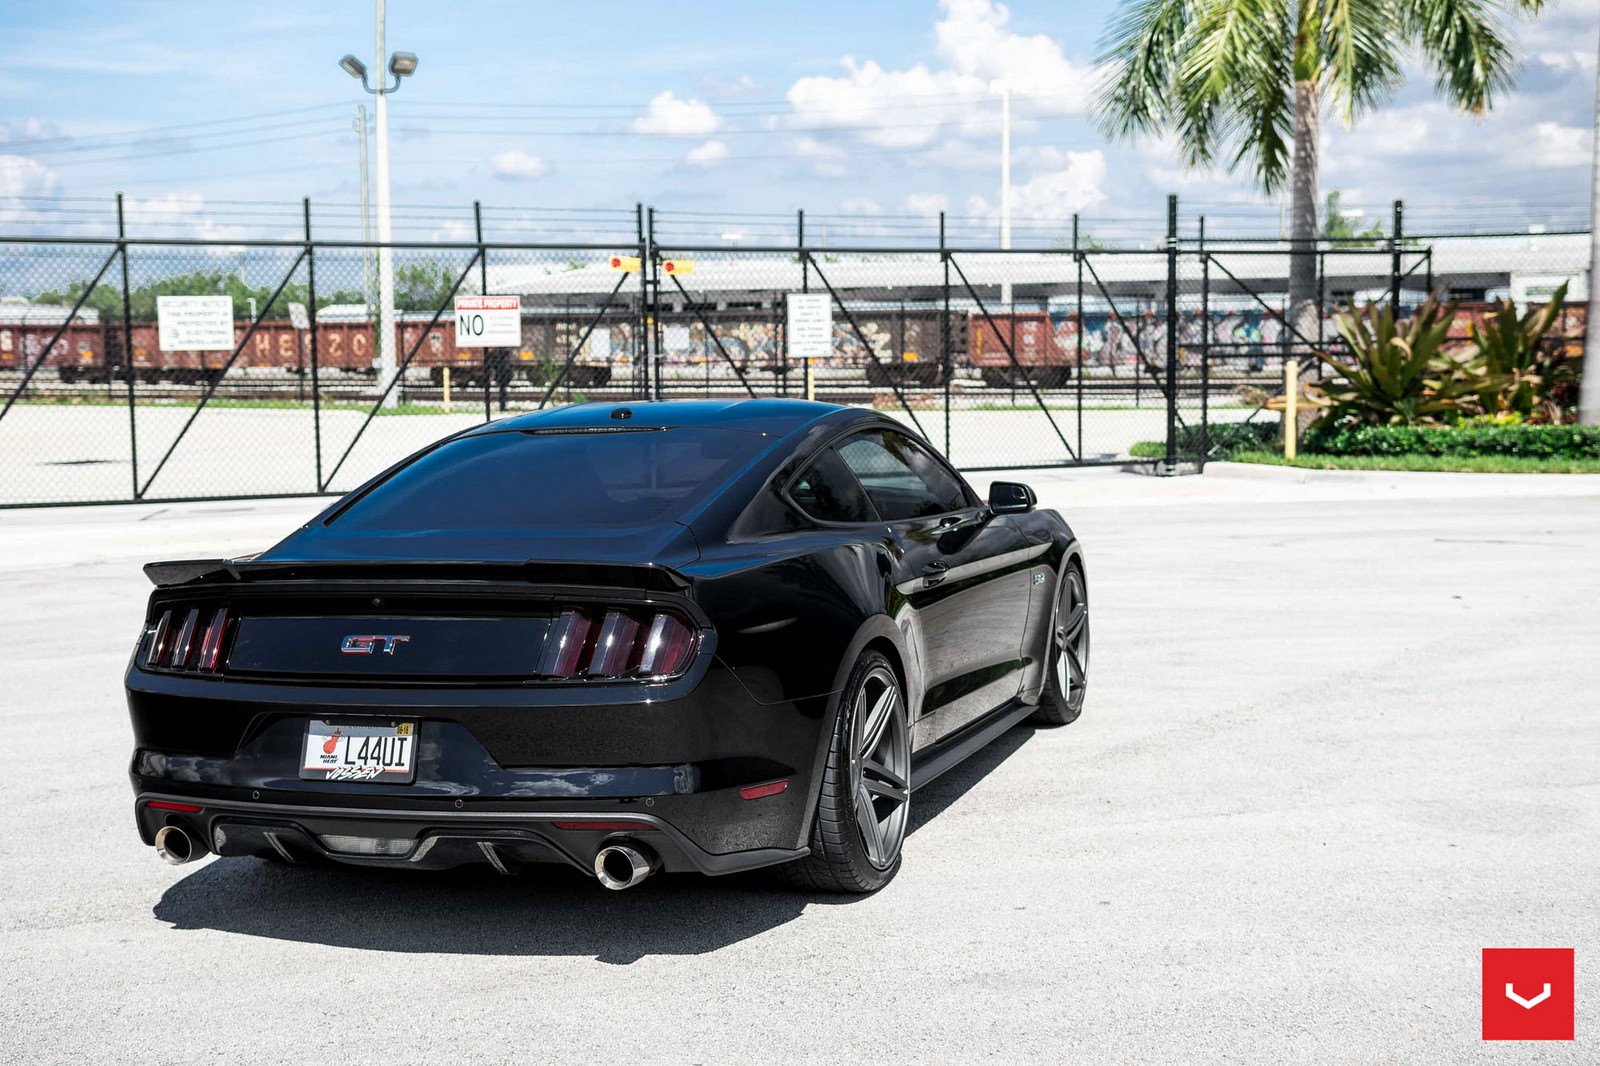 2015, Ford, Mustang, Coupe, Cars, Vossen, Wheels, Cars Wallpaper